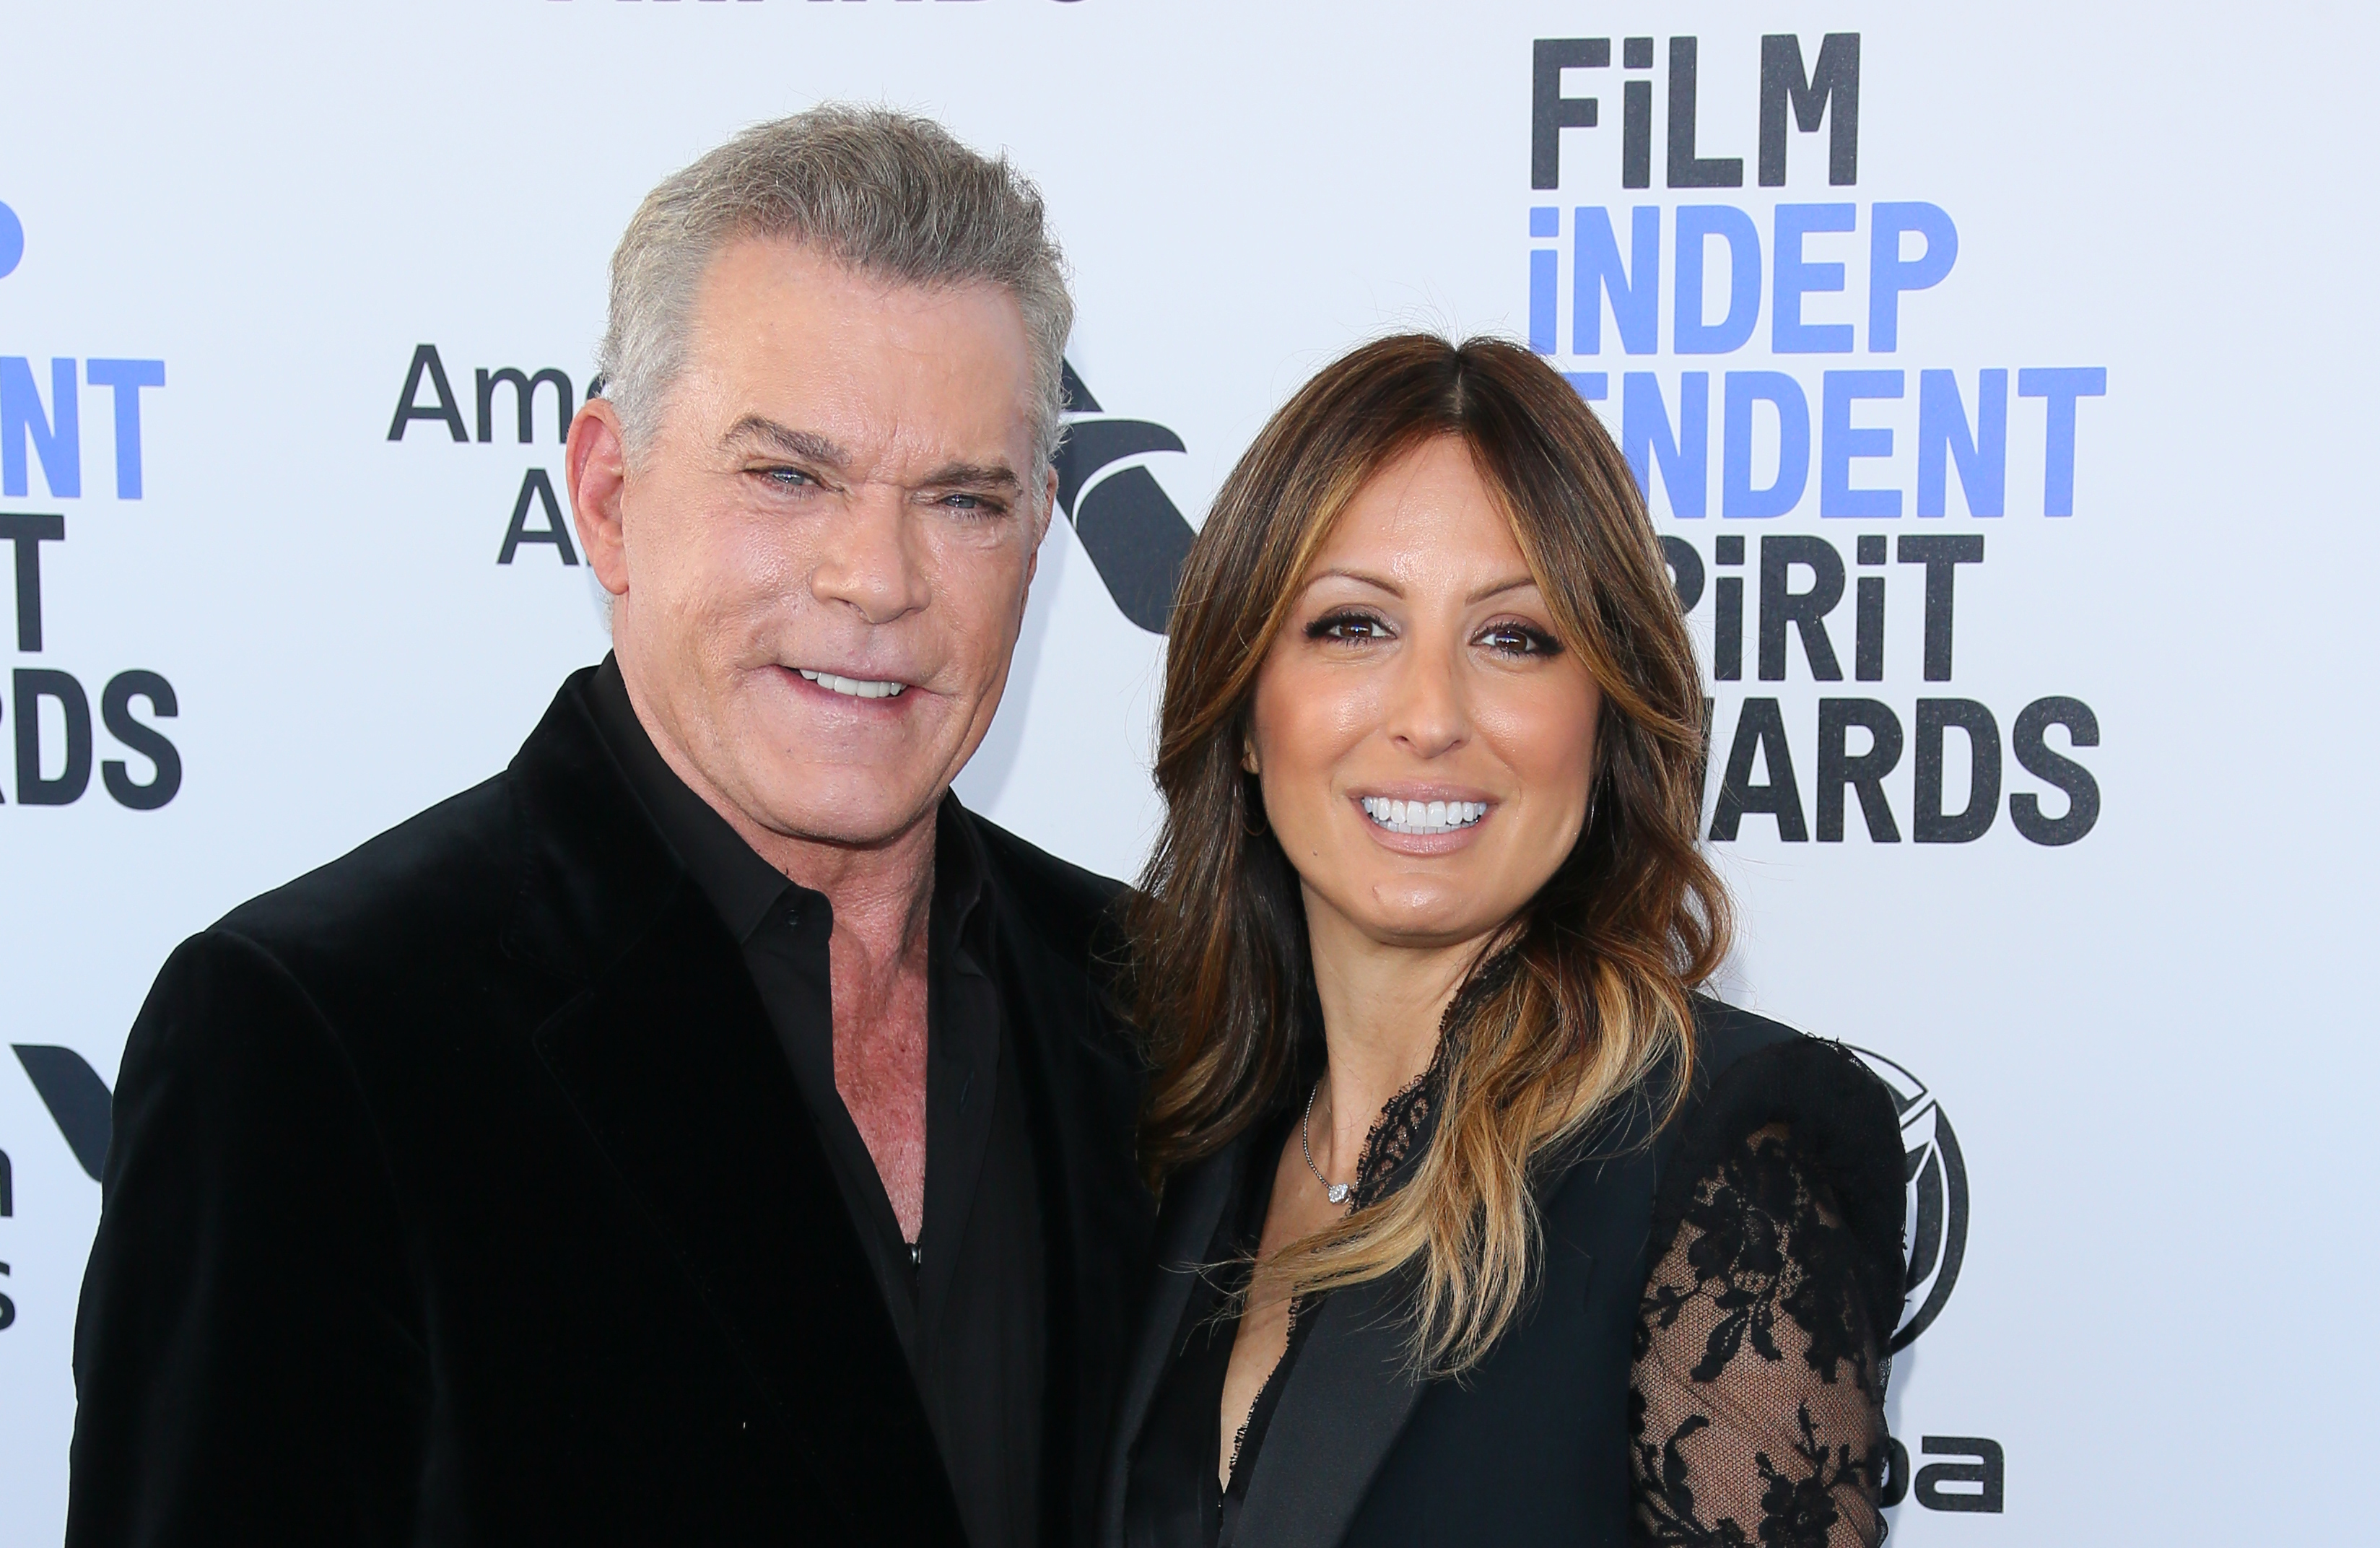 Ray Liotta and his fiancee, Jacy Nittolo, smile together on the red carpet at the Film Independent Spirit Awards